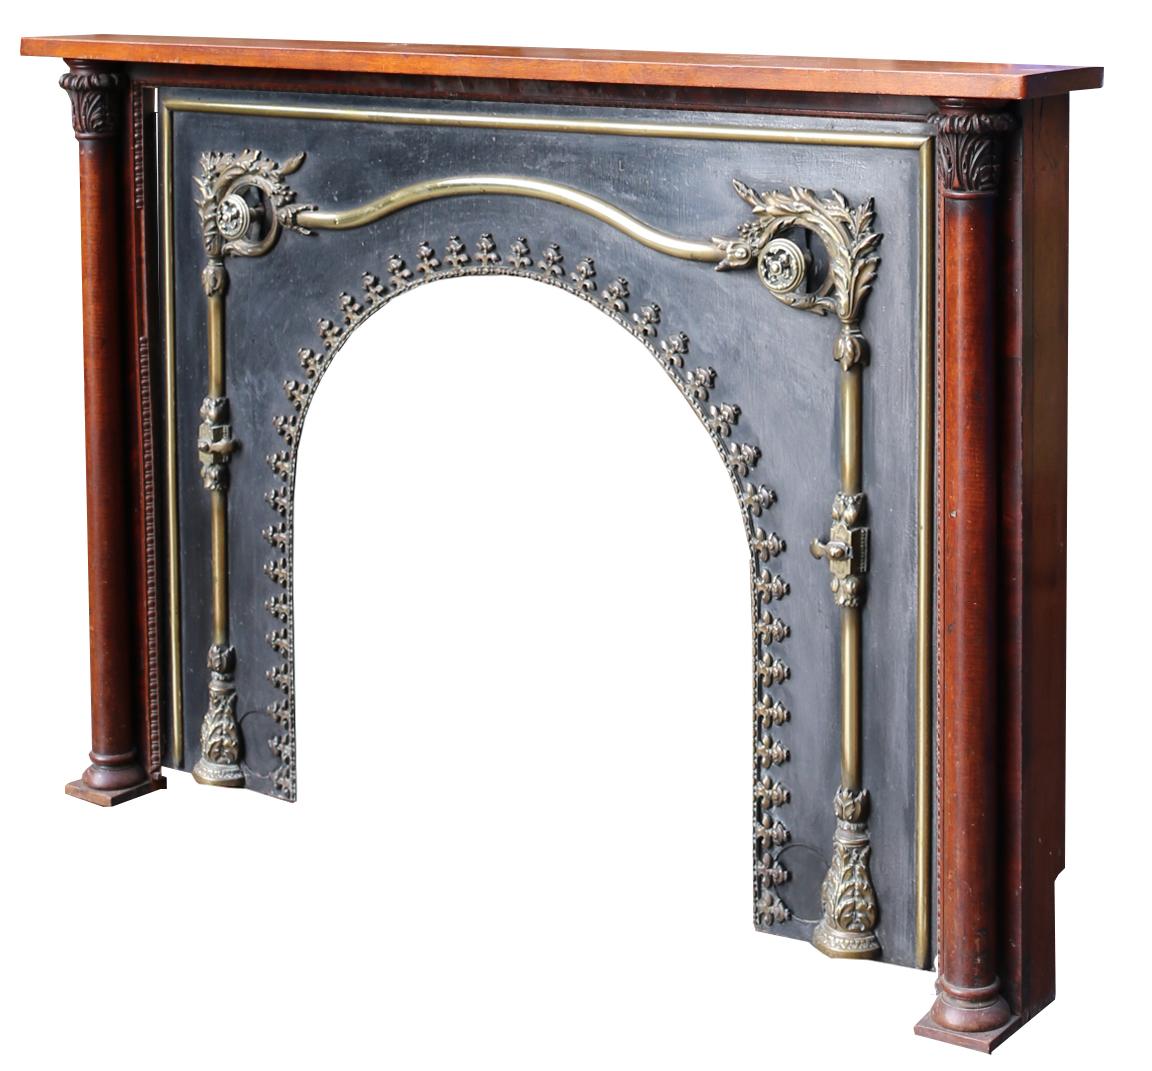 Antique English Regency Style Mantel  In Good Condition For Sale In Wormelow, Herefordshire